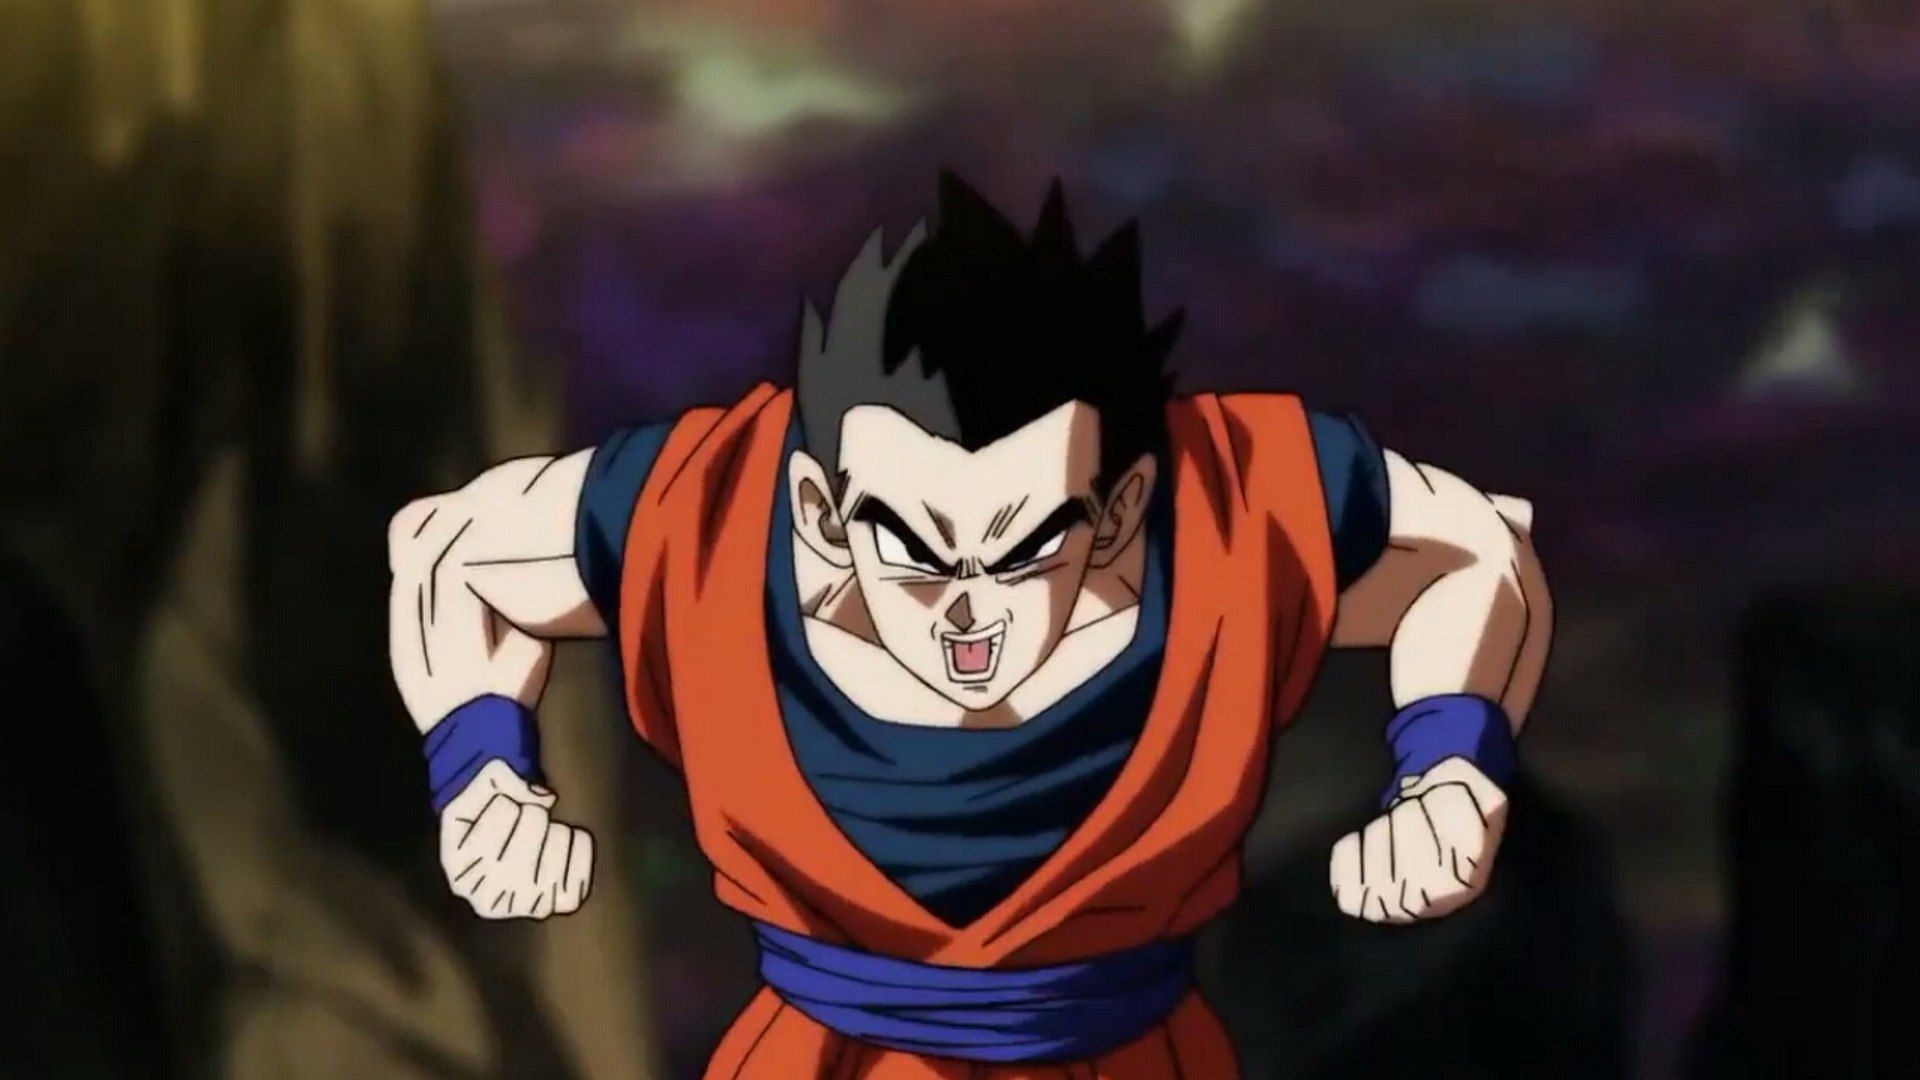 Gohan as seen in Dragon Ball Super's Tournament of Power arc (Image via Toei Animation)